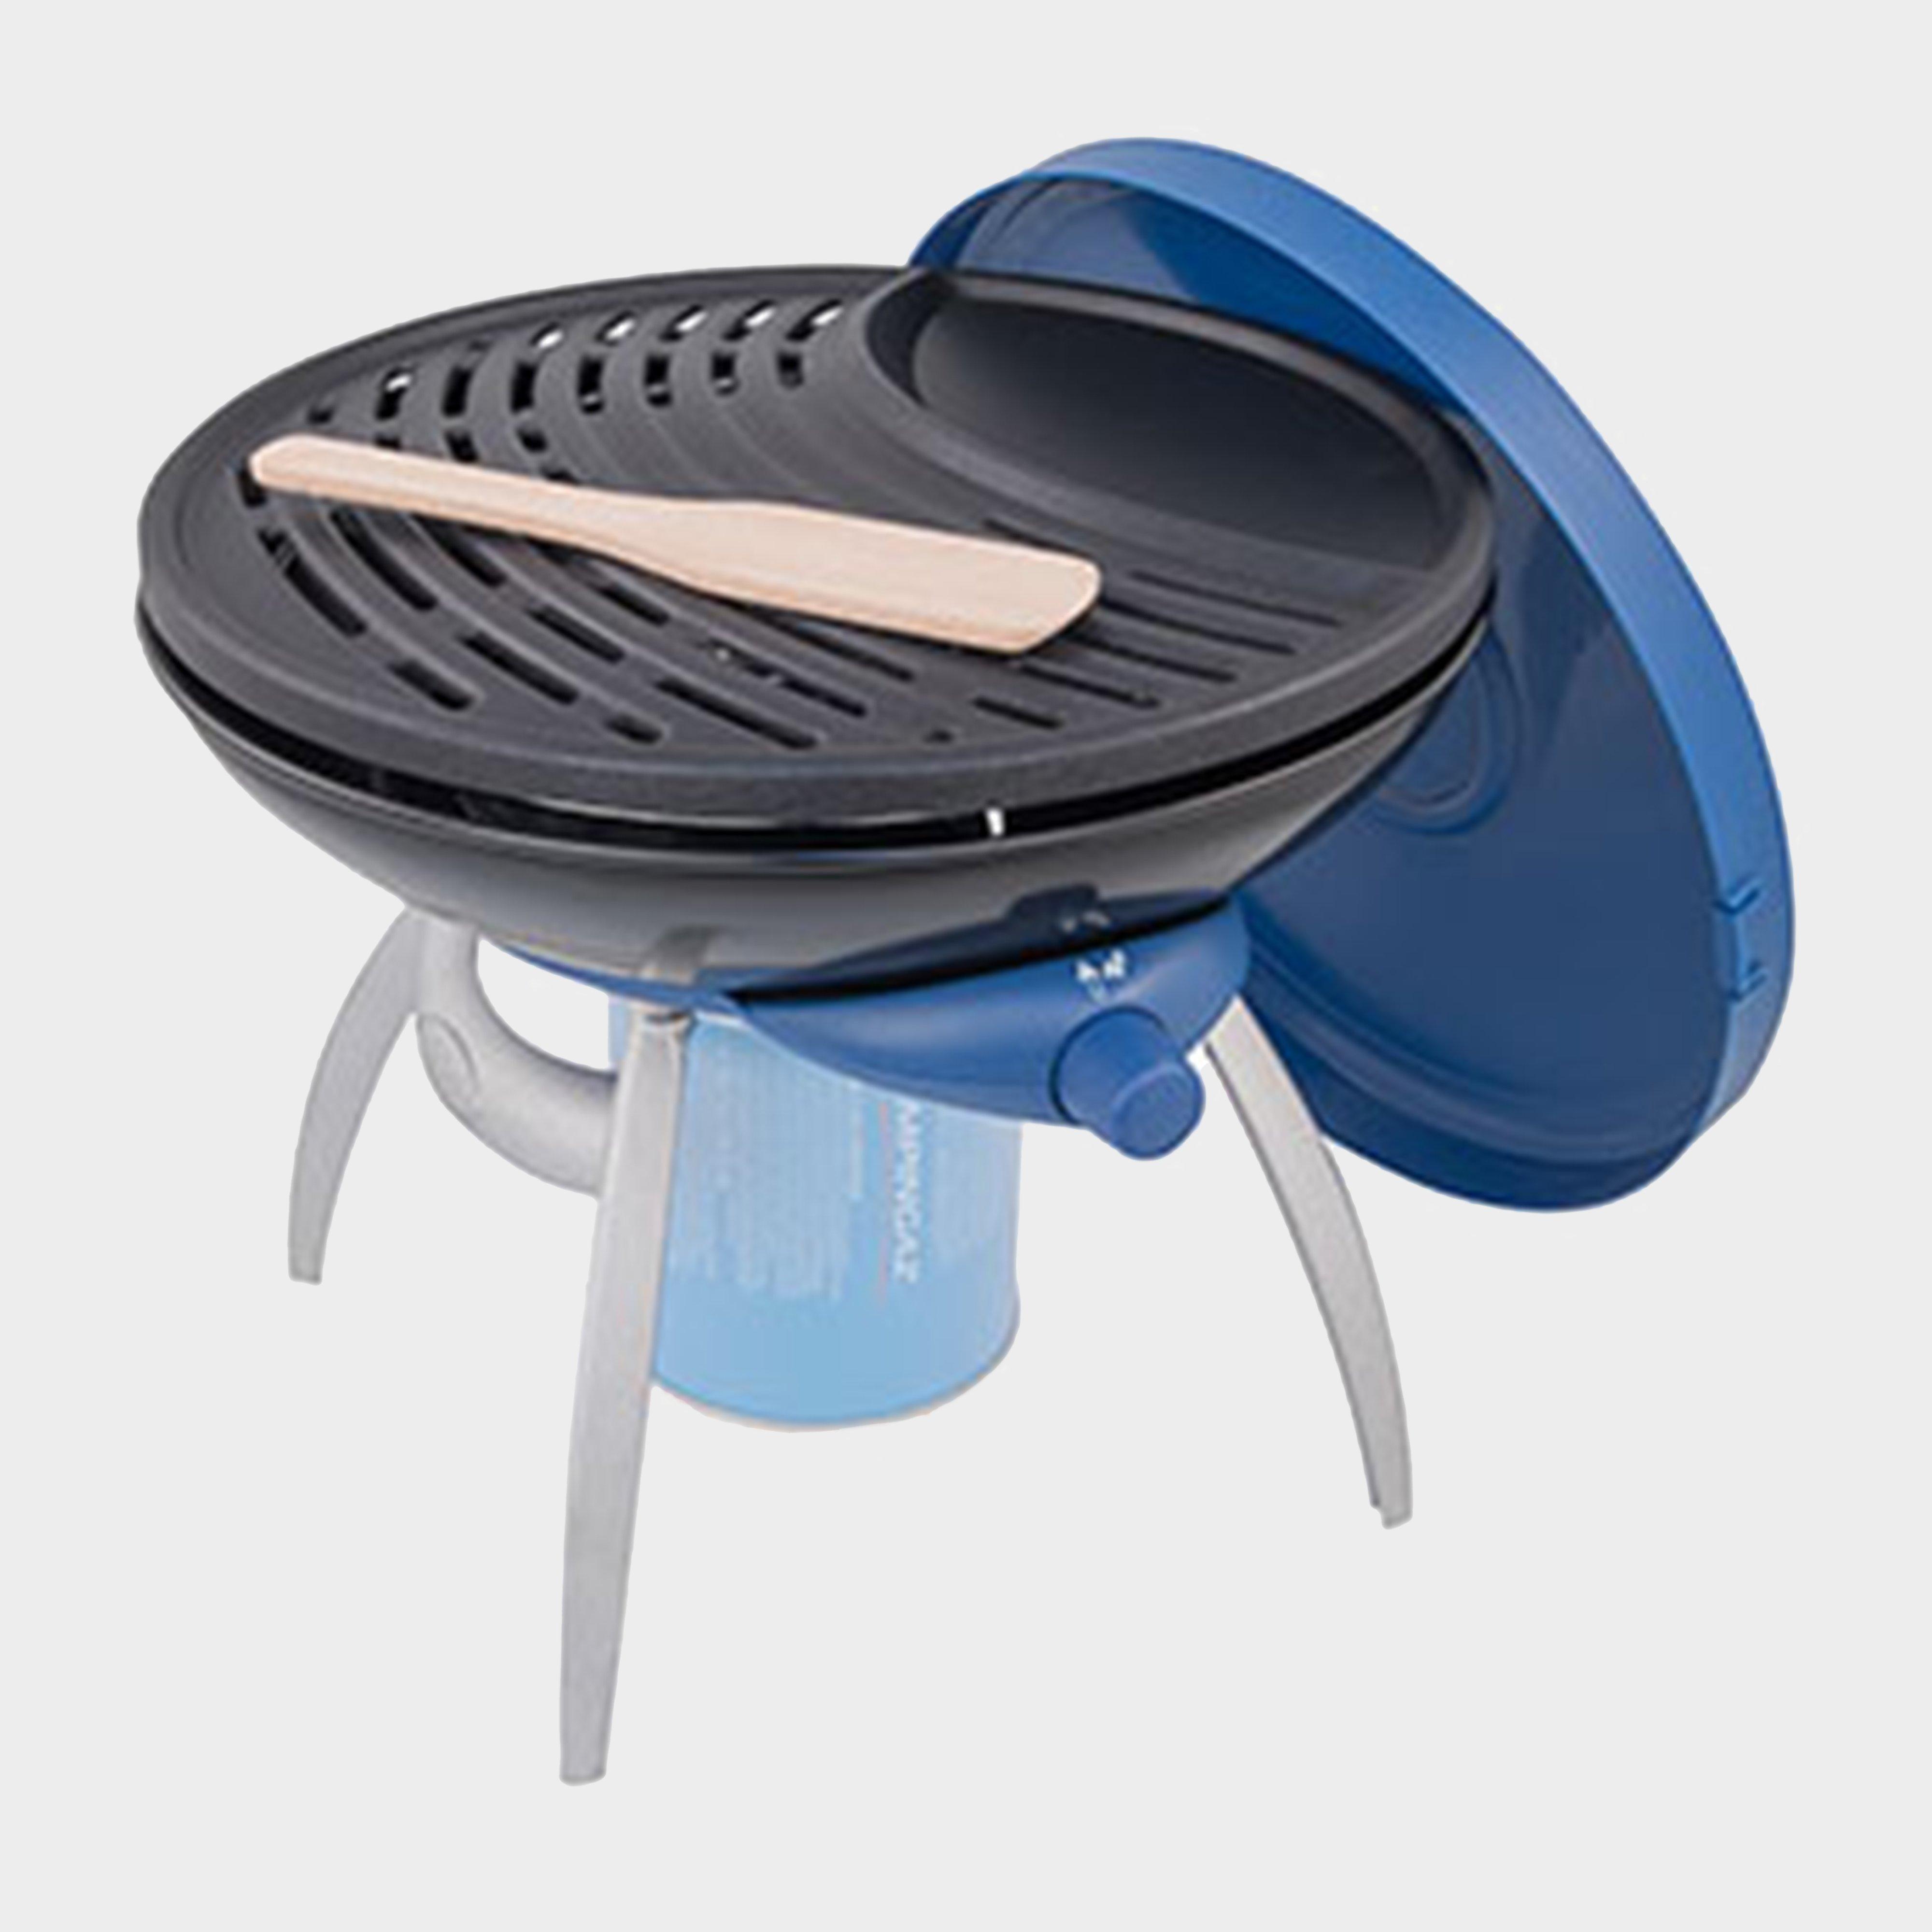  Campingaz Party Grill, Blue